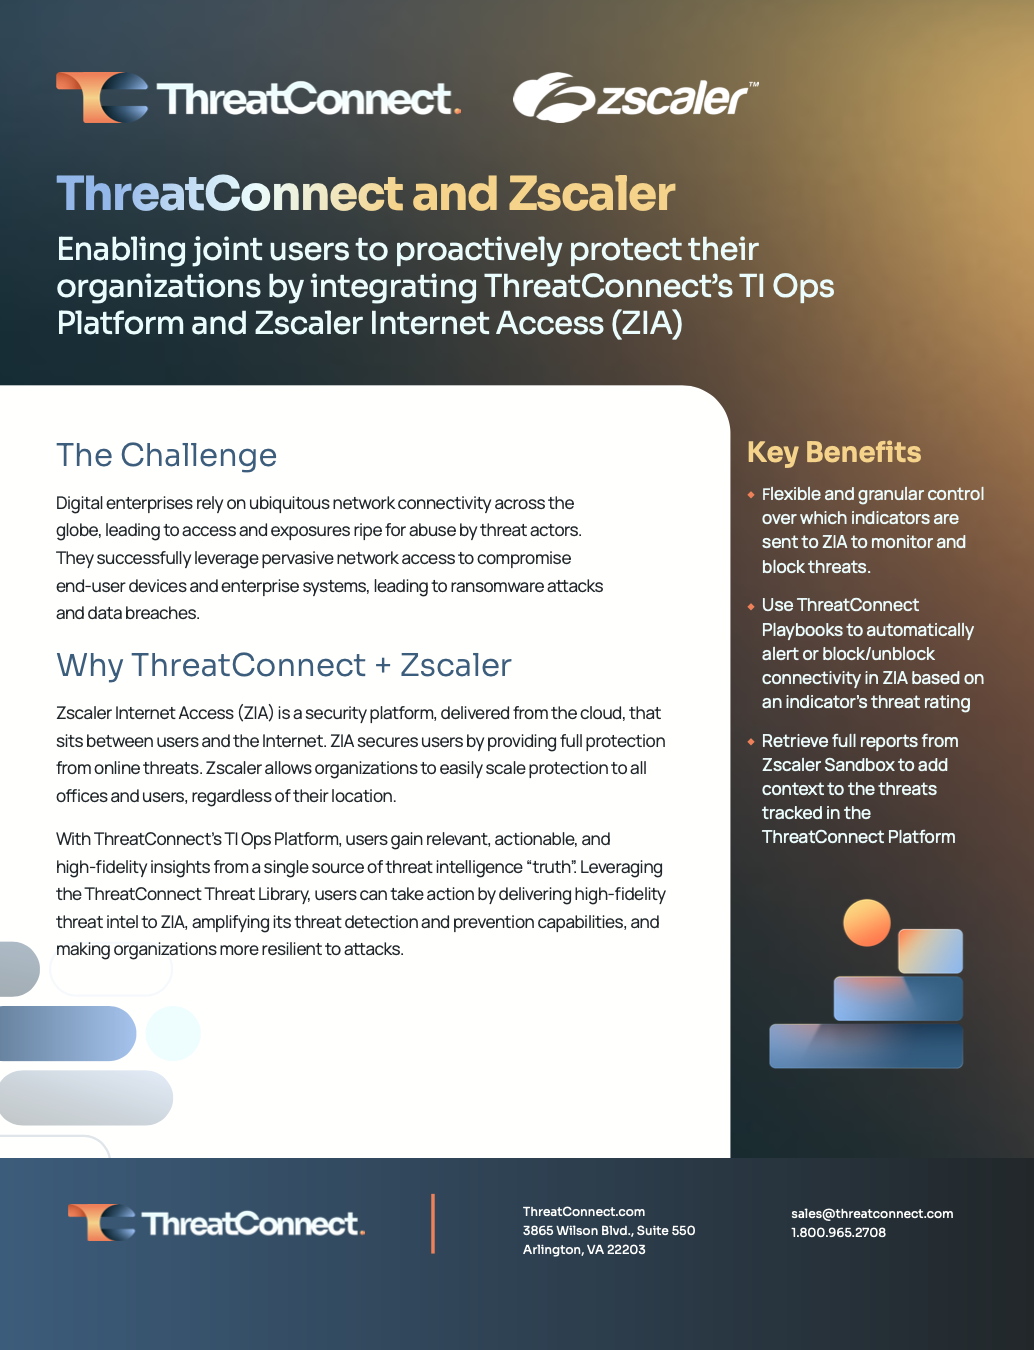 a flyer for ThreatConnect and zscaler enables joint users to proactively protect their organizations